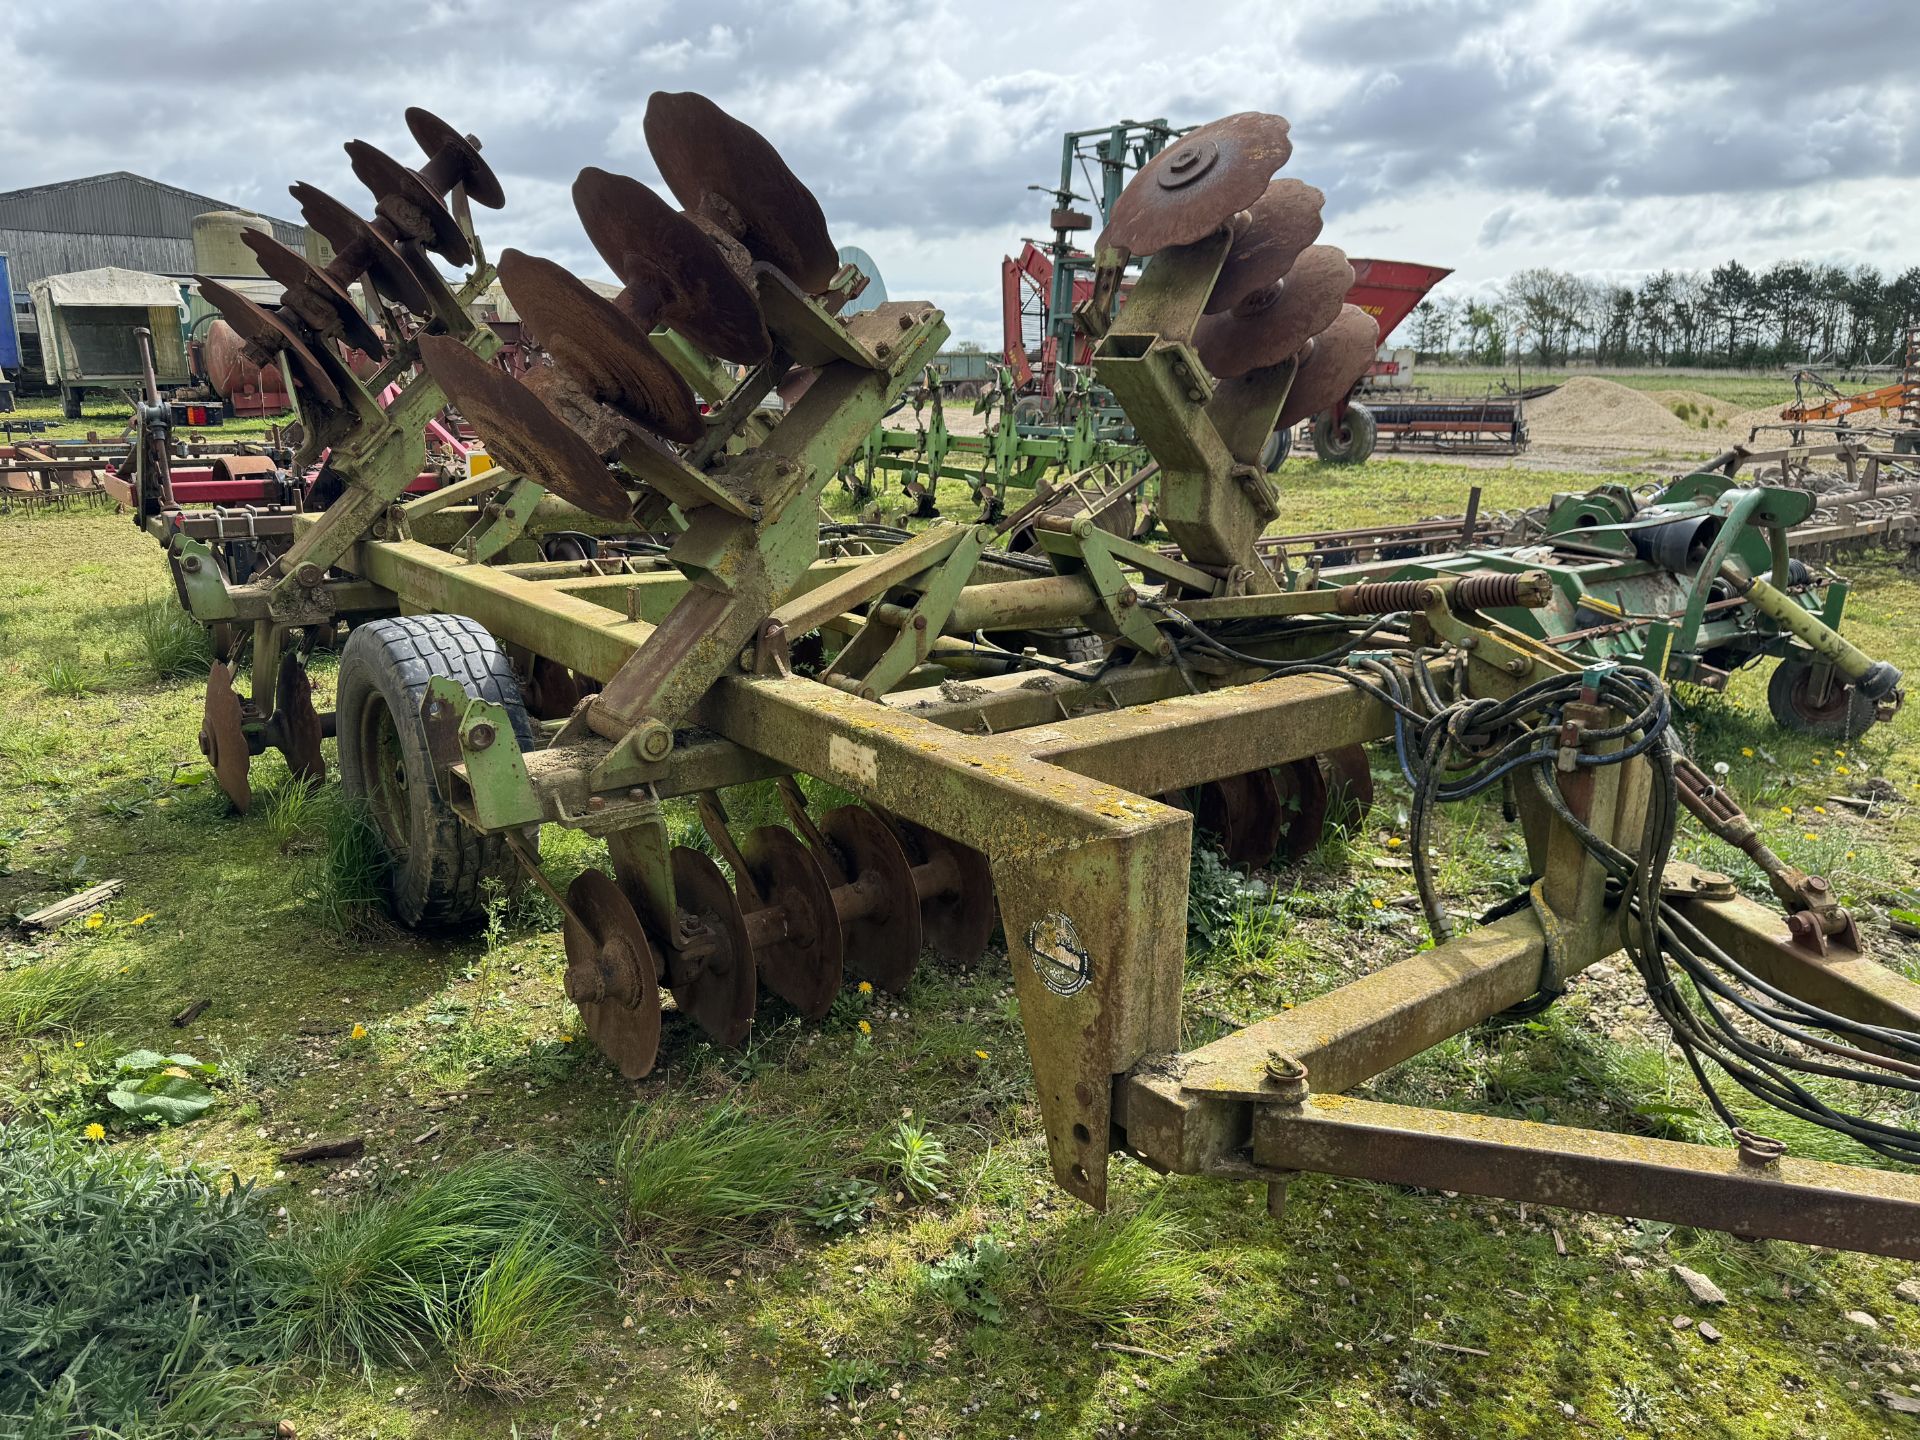 Dowdeswell 4.5m disc harrows, scalloped front and rear discs, hydraulic folding